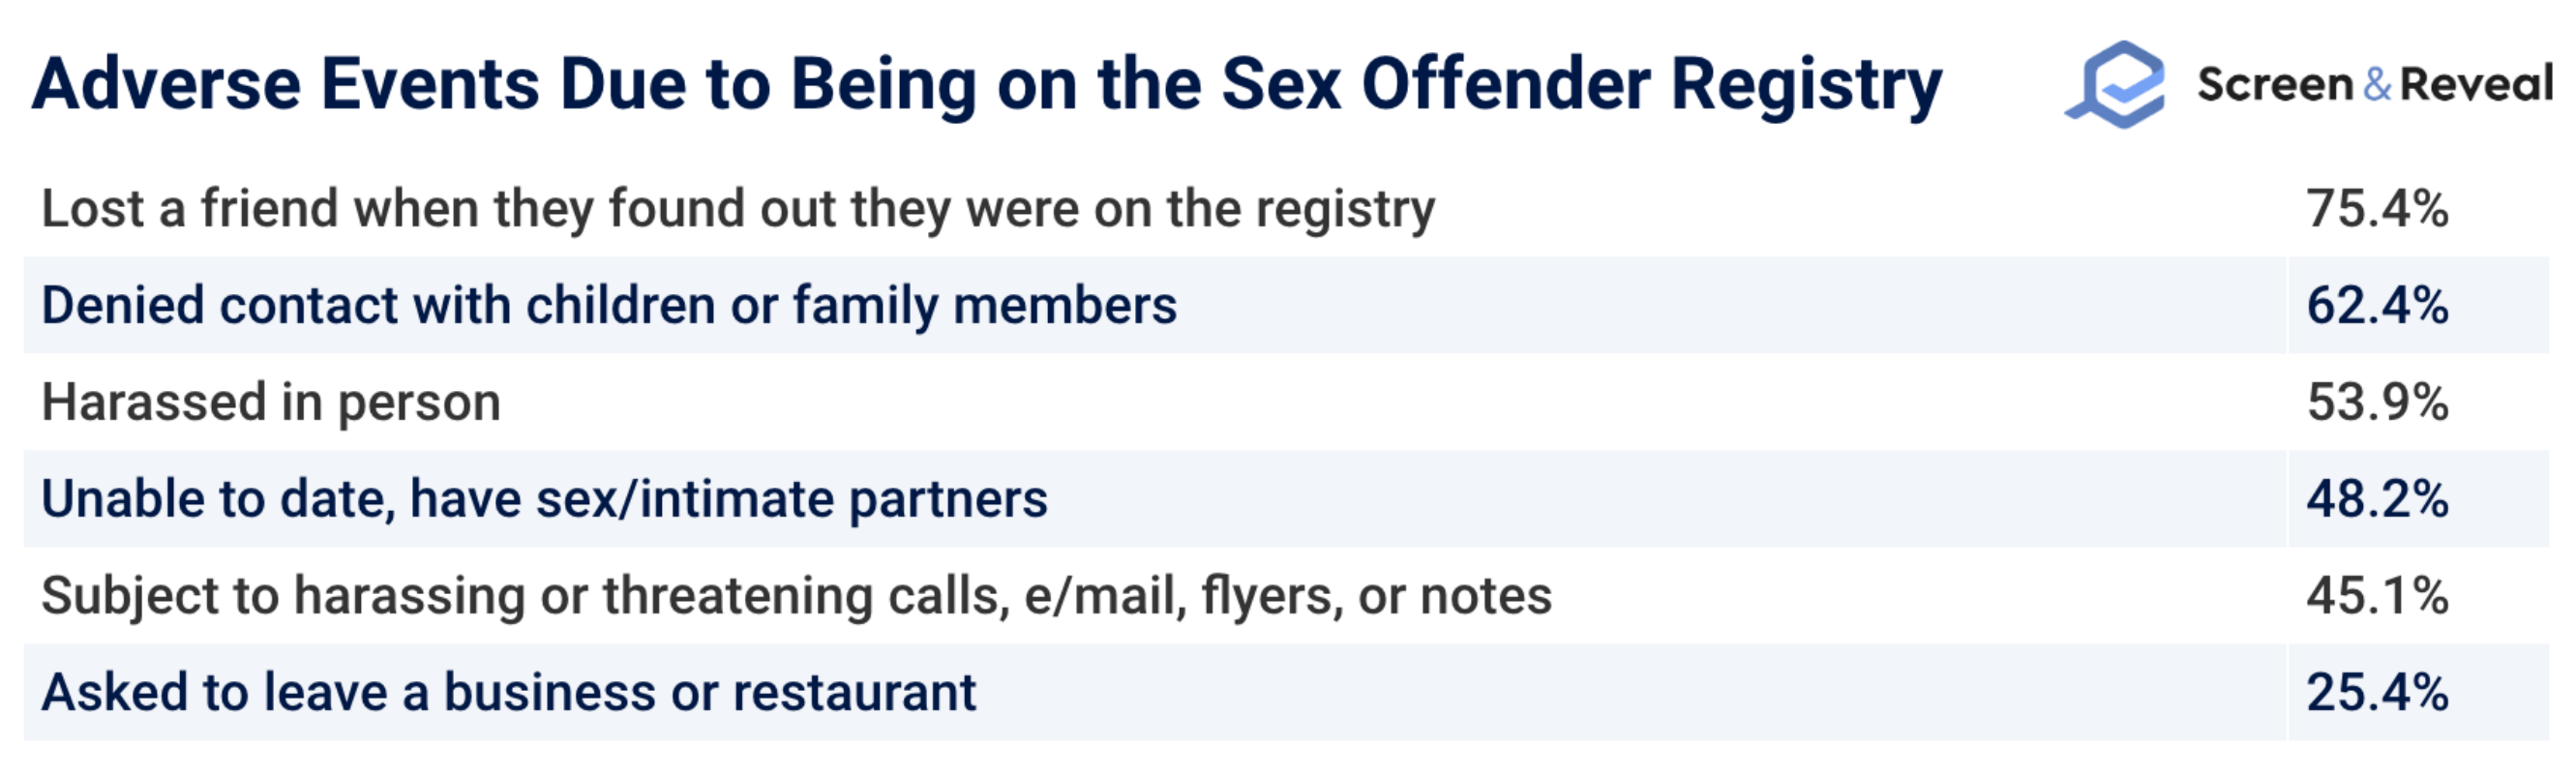 Adverse Events Due to Being on the Sex Offender Registry